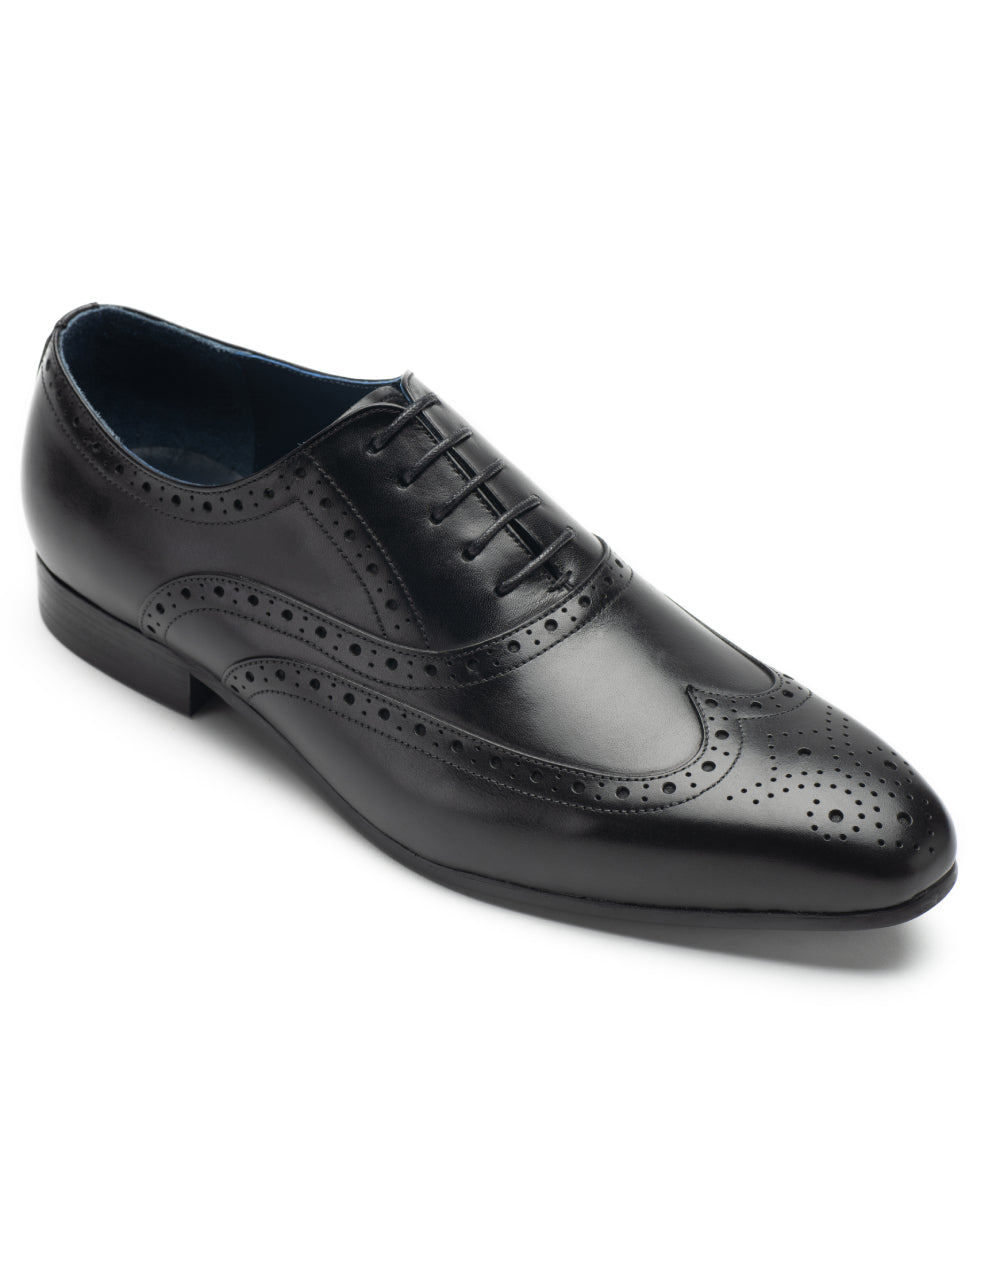 Black Lace-up Wingtip Oxford